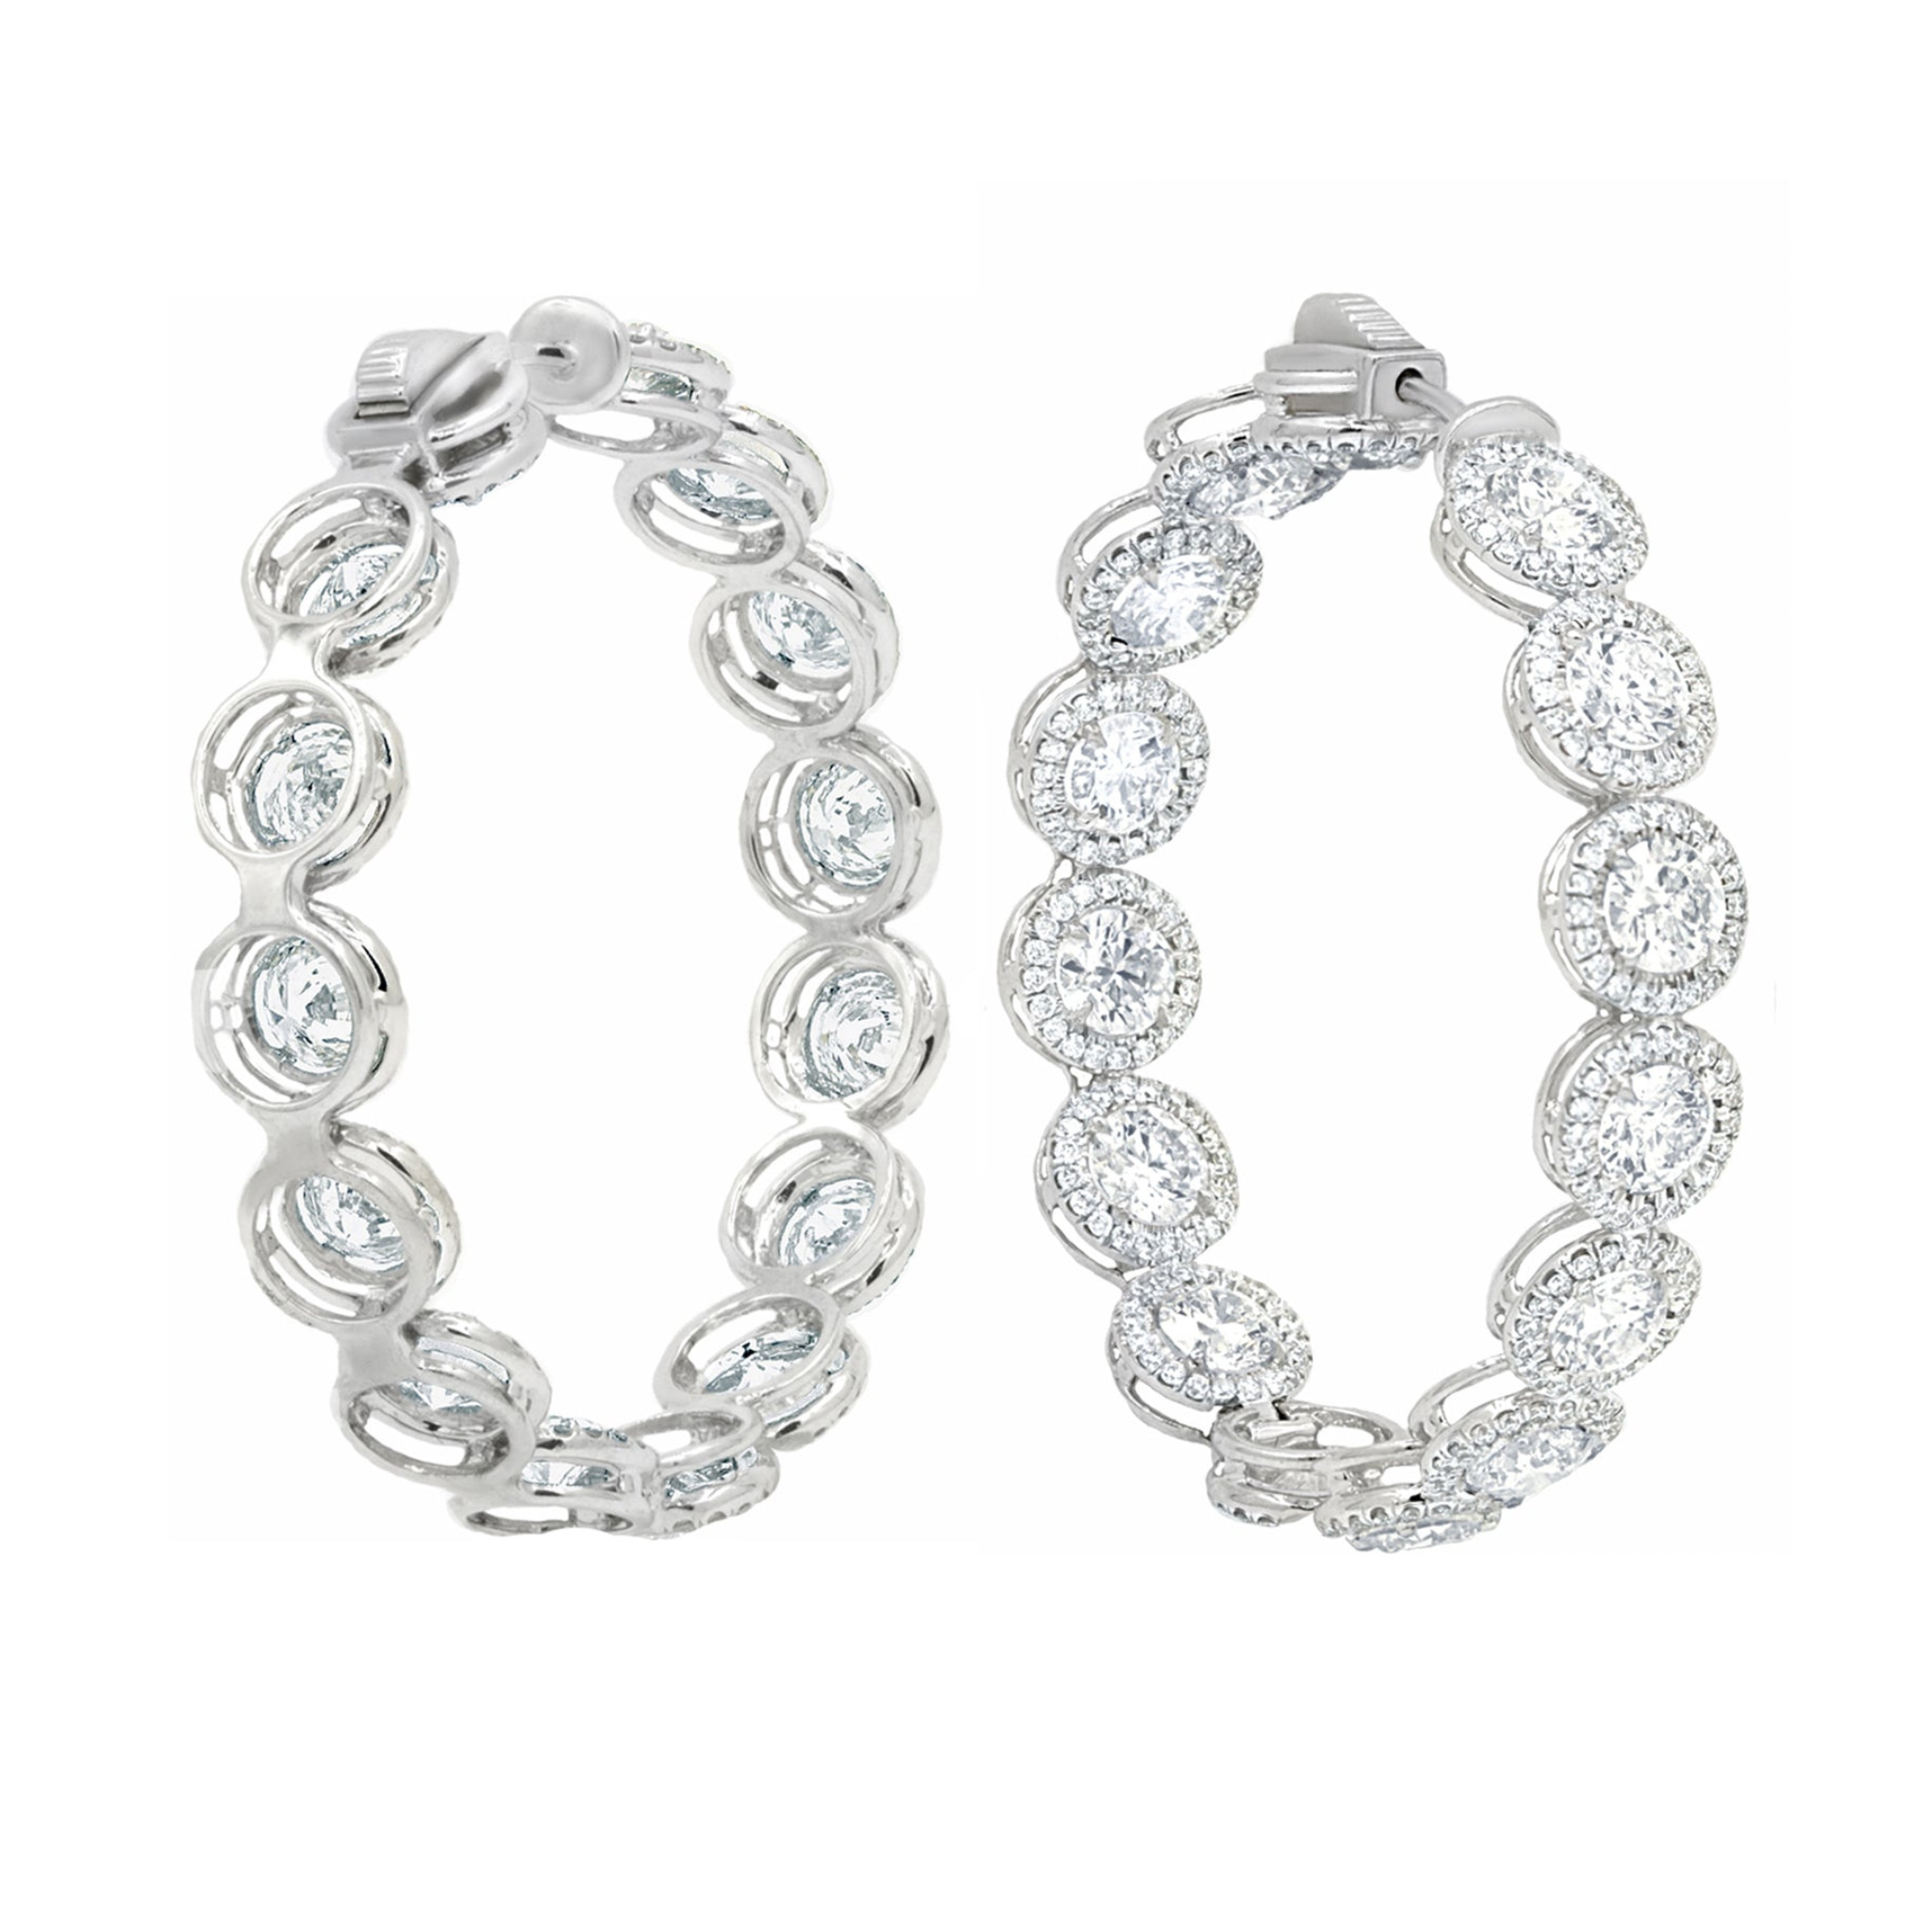 18 Kt White Gold Hoop Earrings with 12.20 cts.jpg